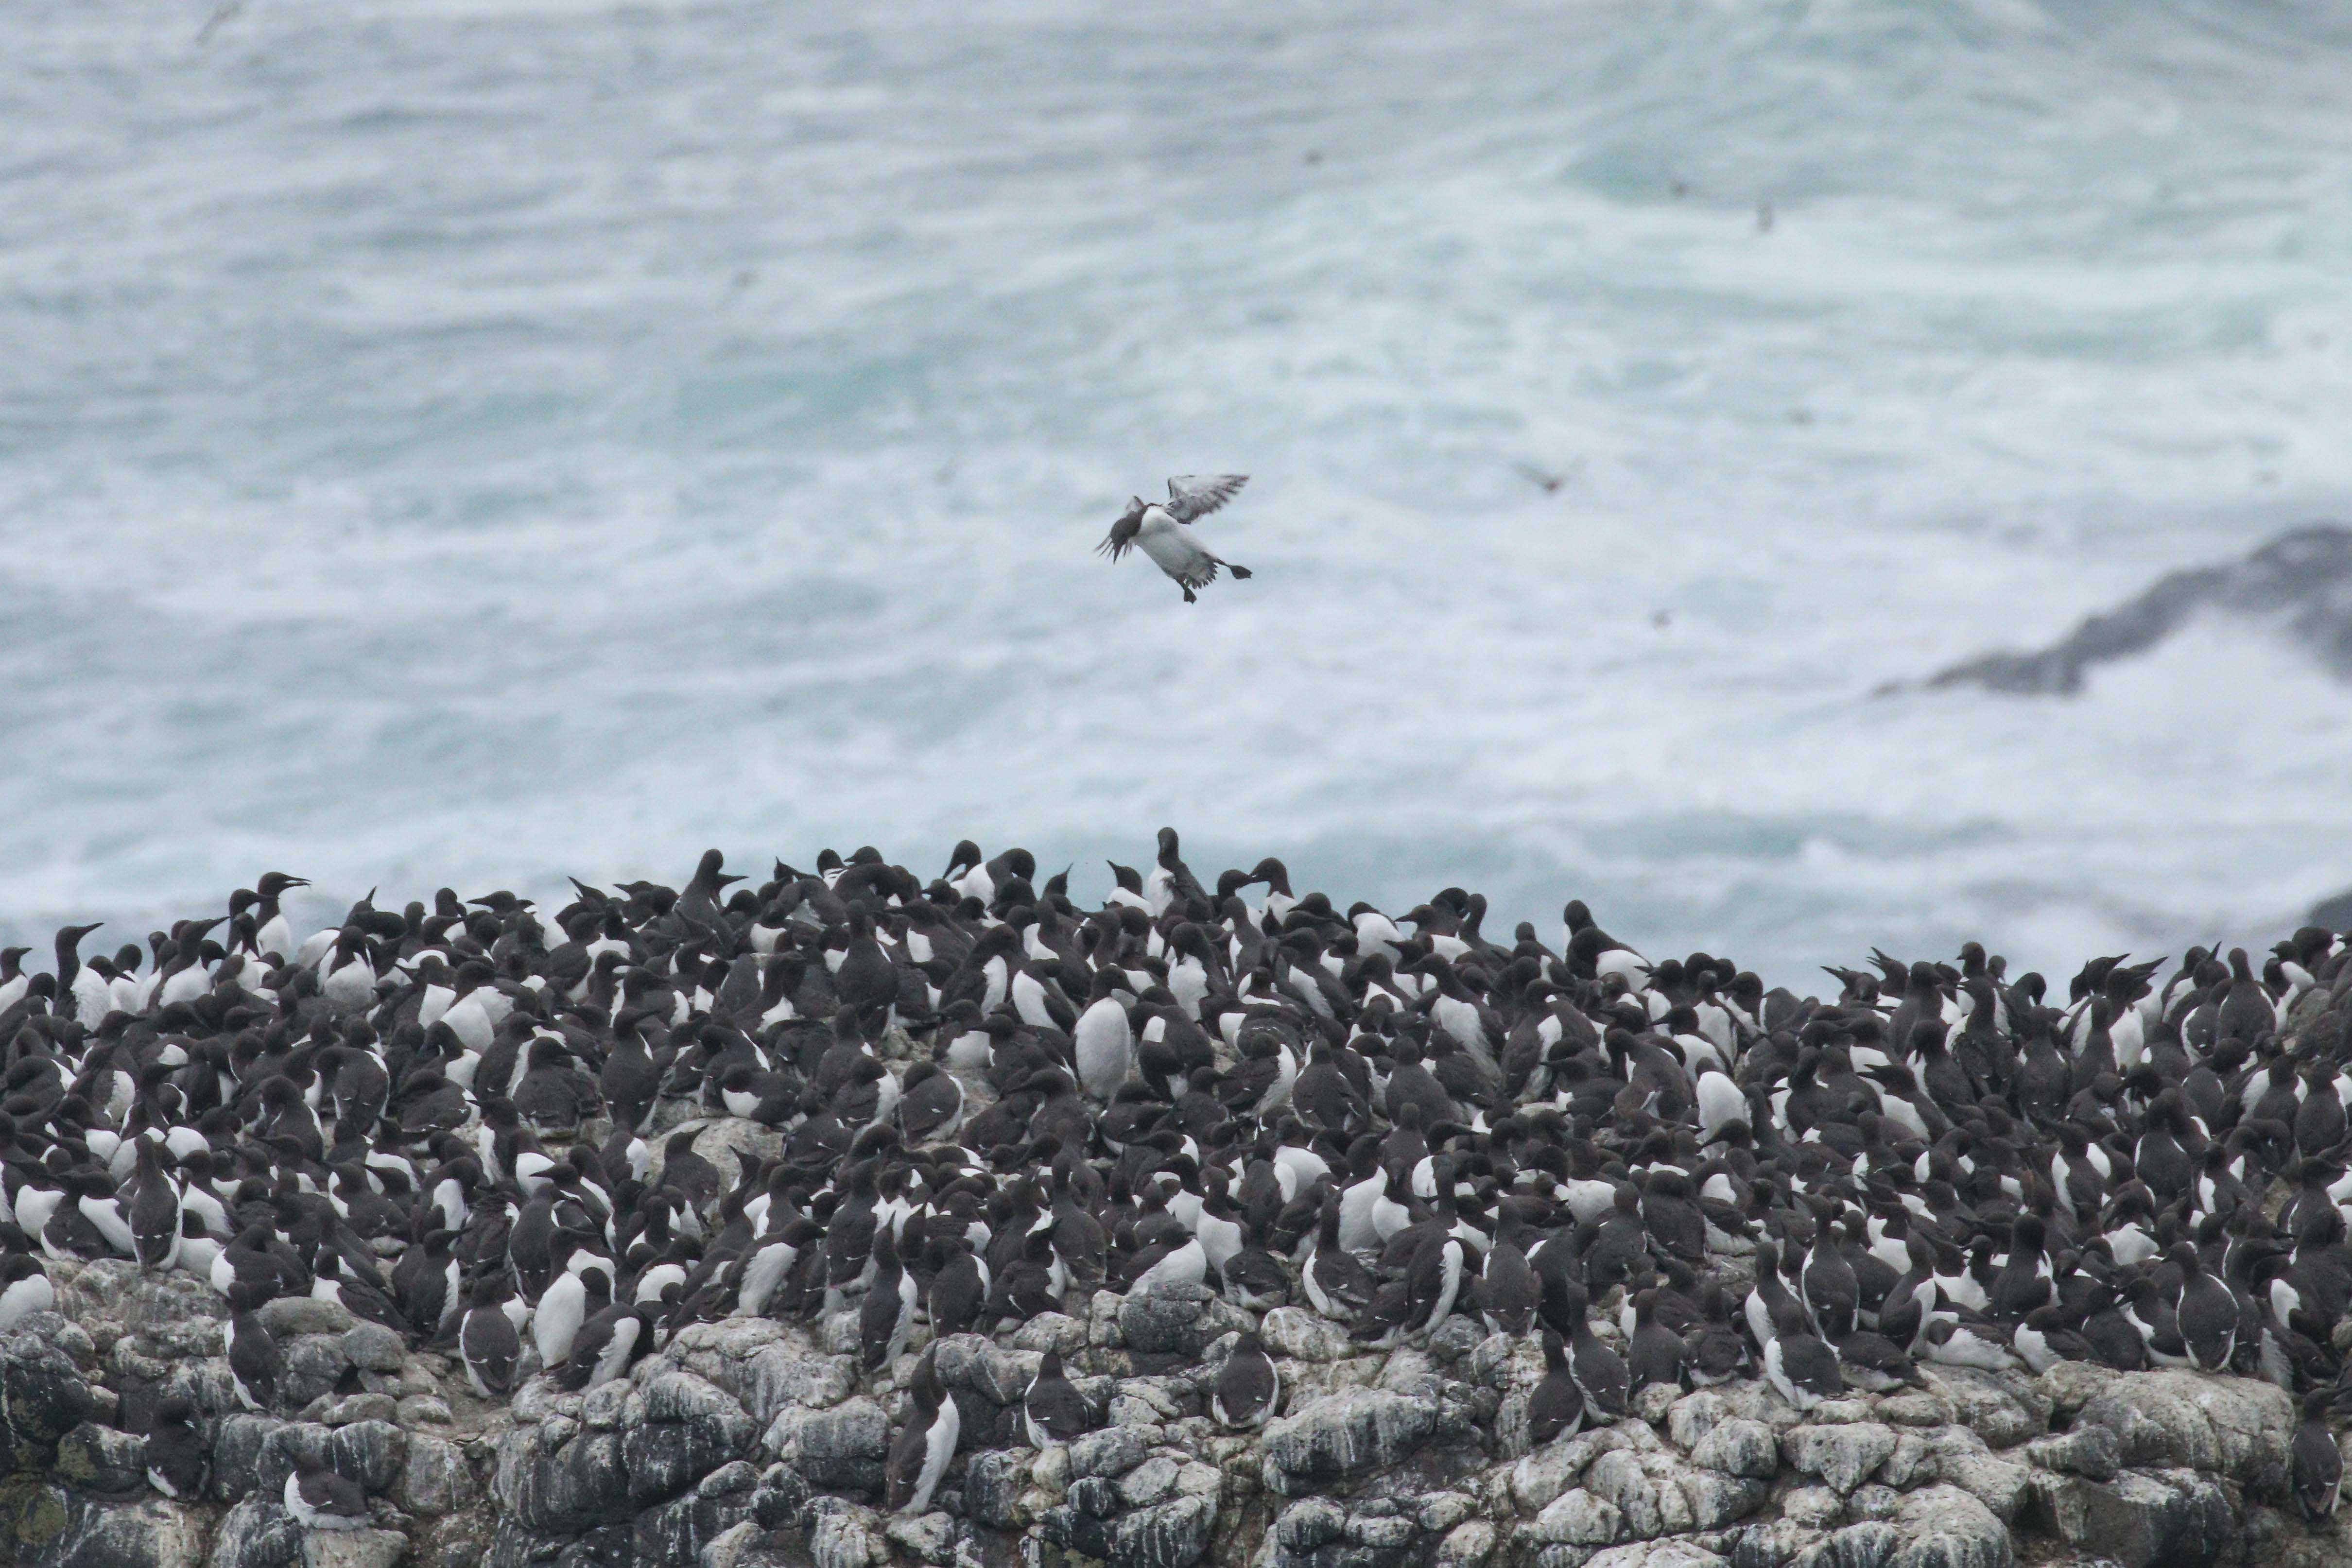 A guillemot colony with a single guillemot coming into land from above